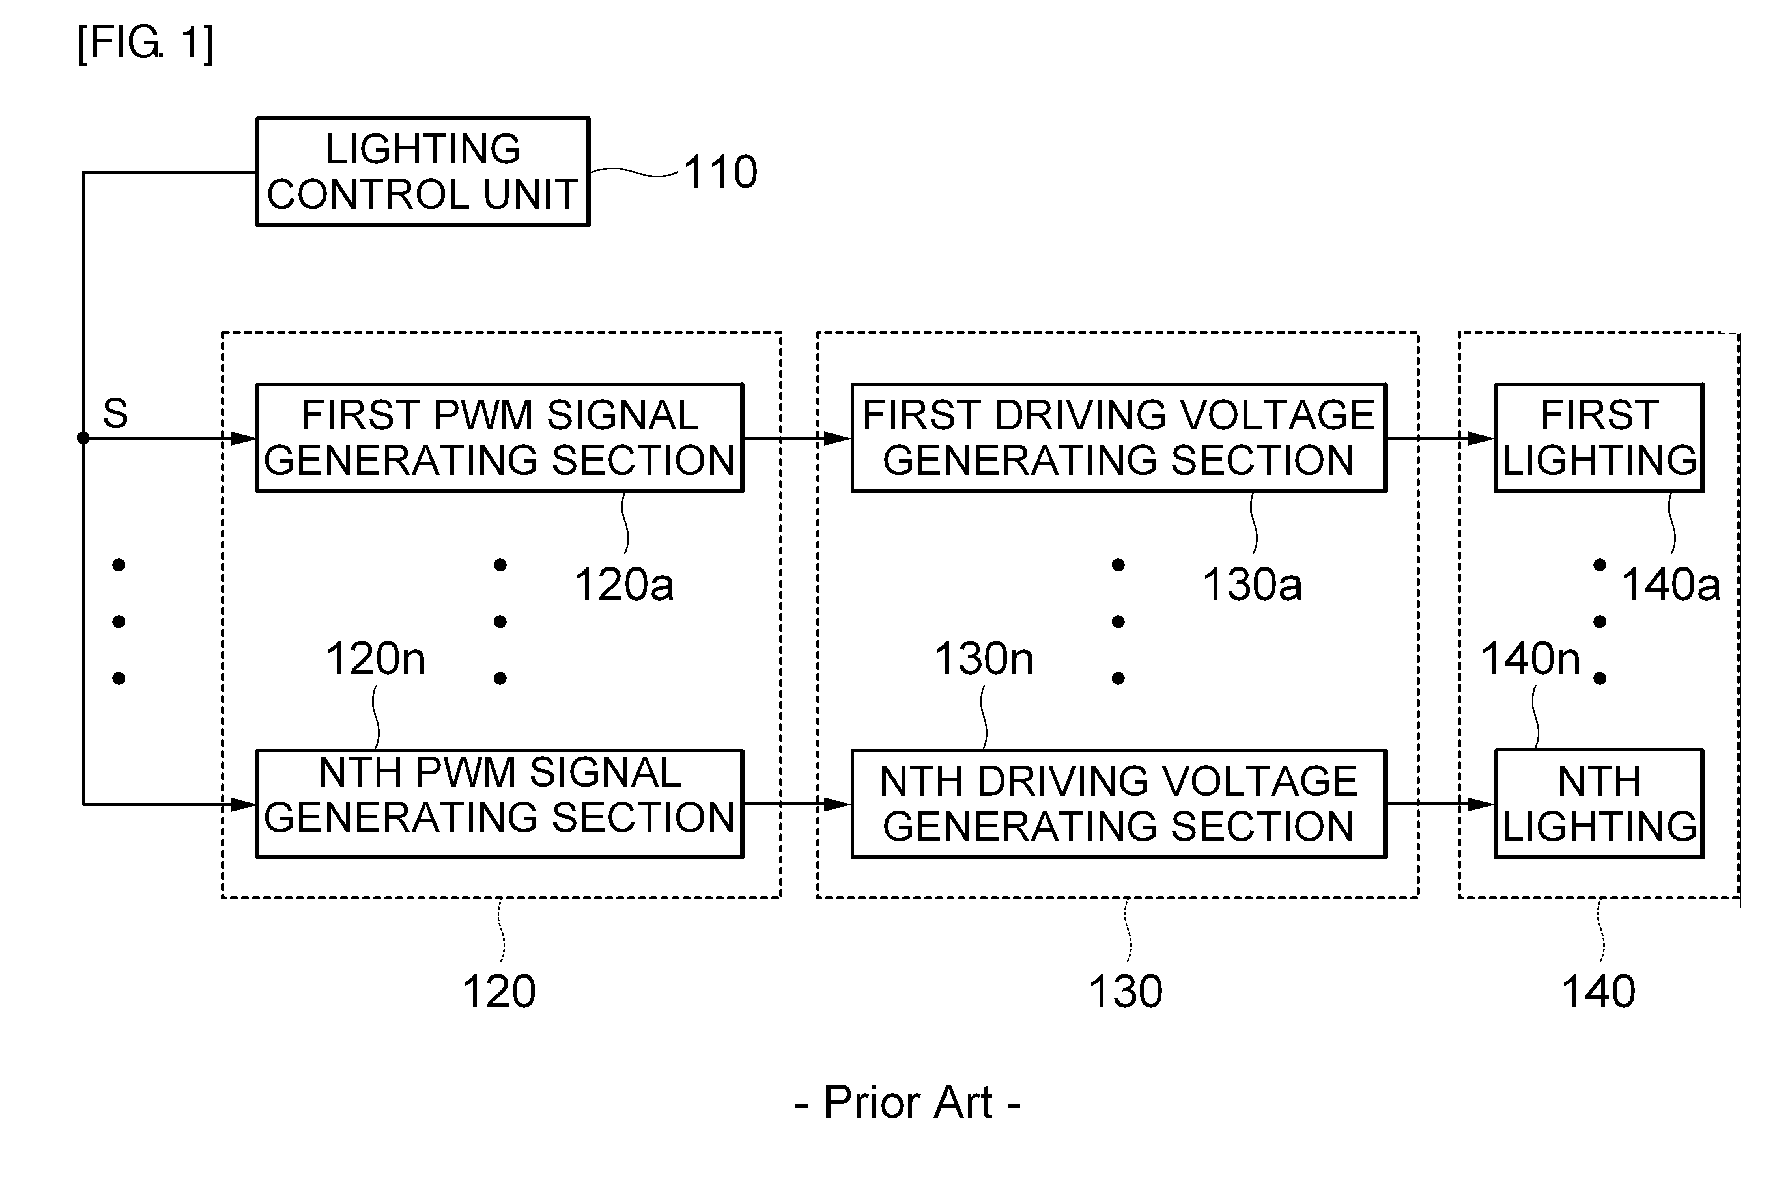 Apparatus and method for controlling lighting brightness through pulse frequency modulation